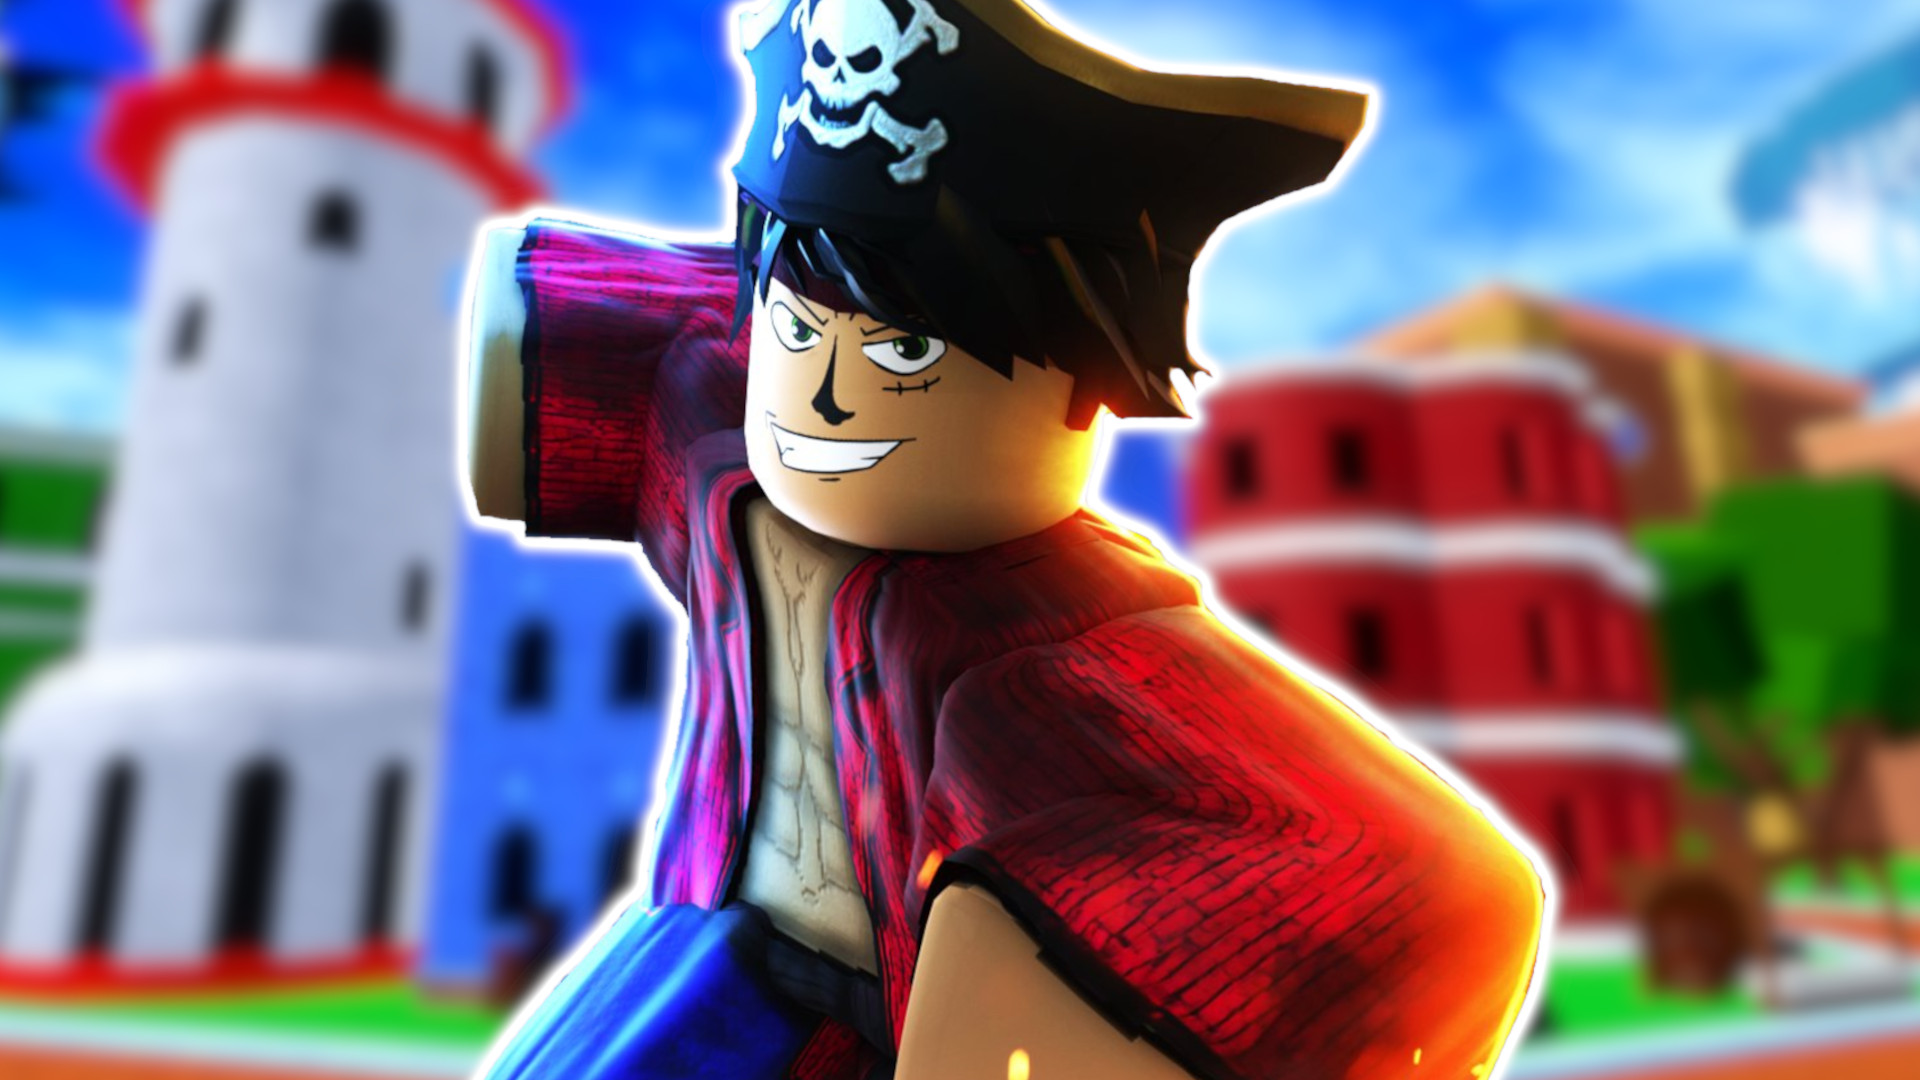 ALL NEW WORKING CODES FOR A ONE PIECE GAME 2023! ROBLOX A ONE PIECE GAME  CODES 